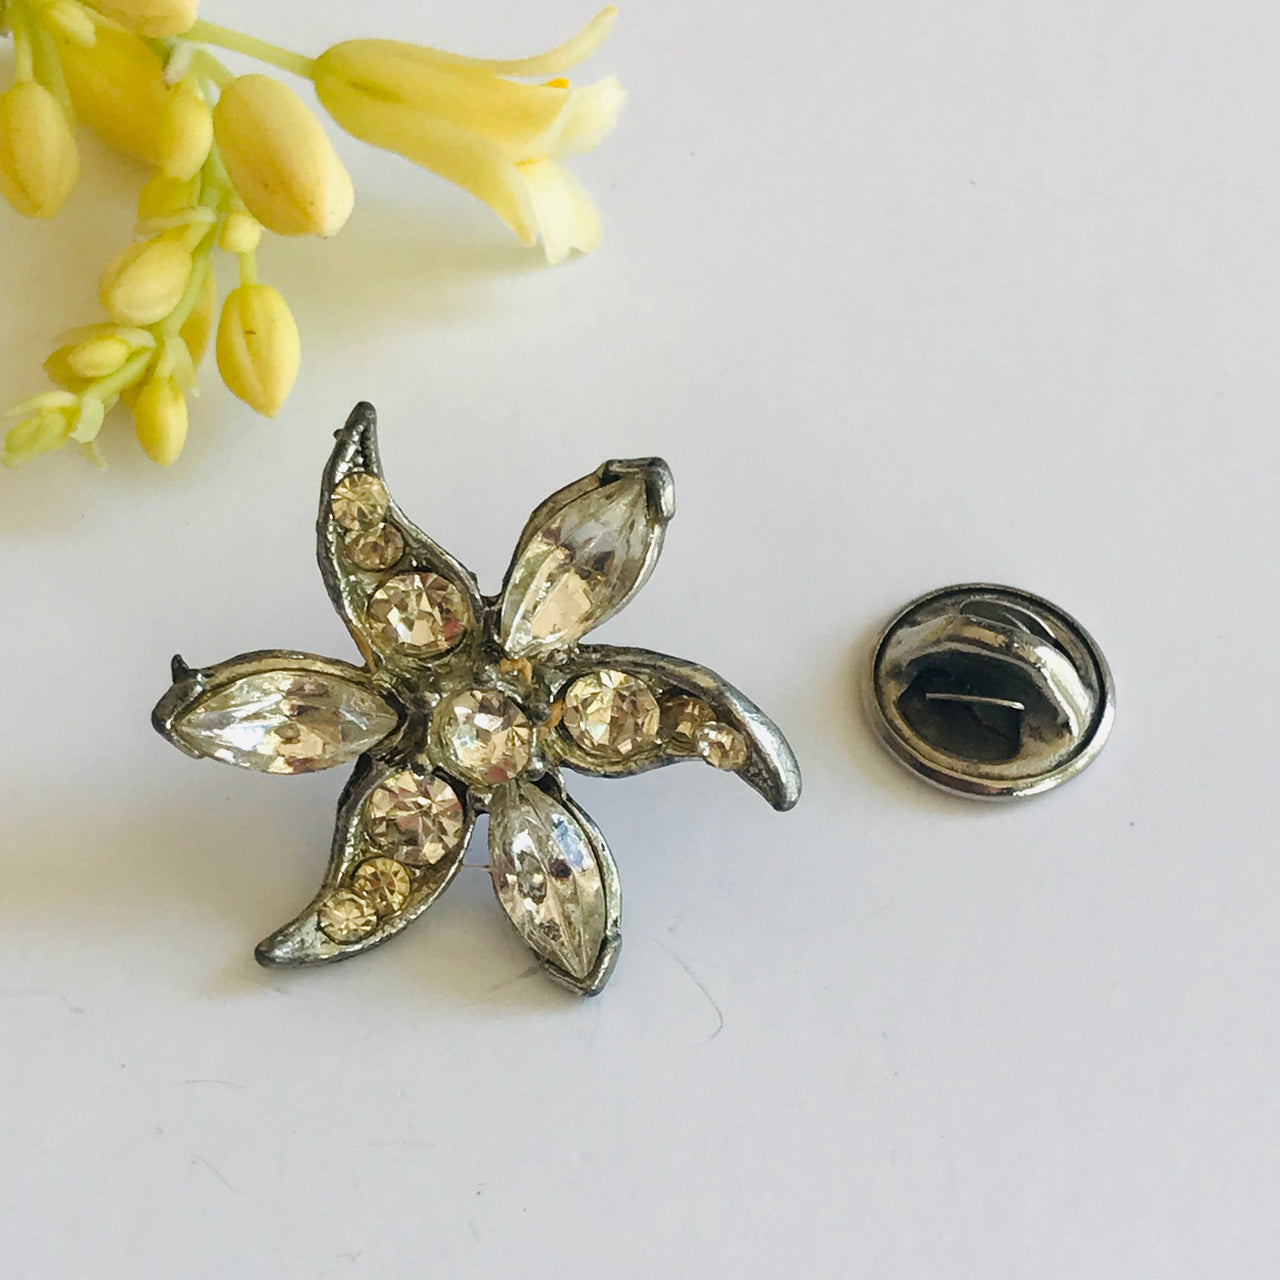 Pewter Rhinestone Sister Flower Pins Jewelry Bloomers and Frocks 